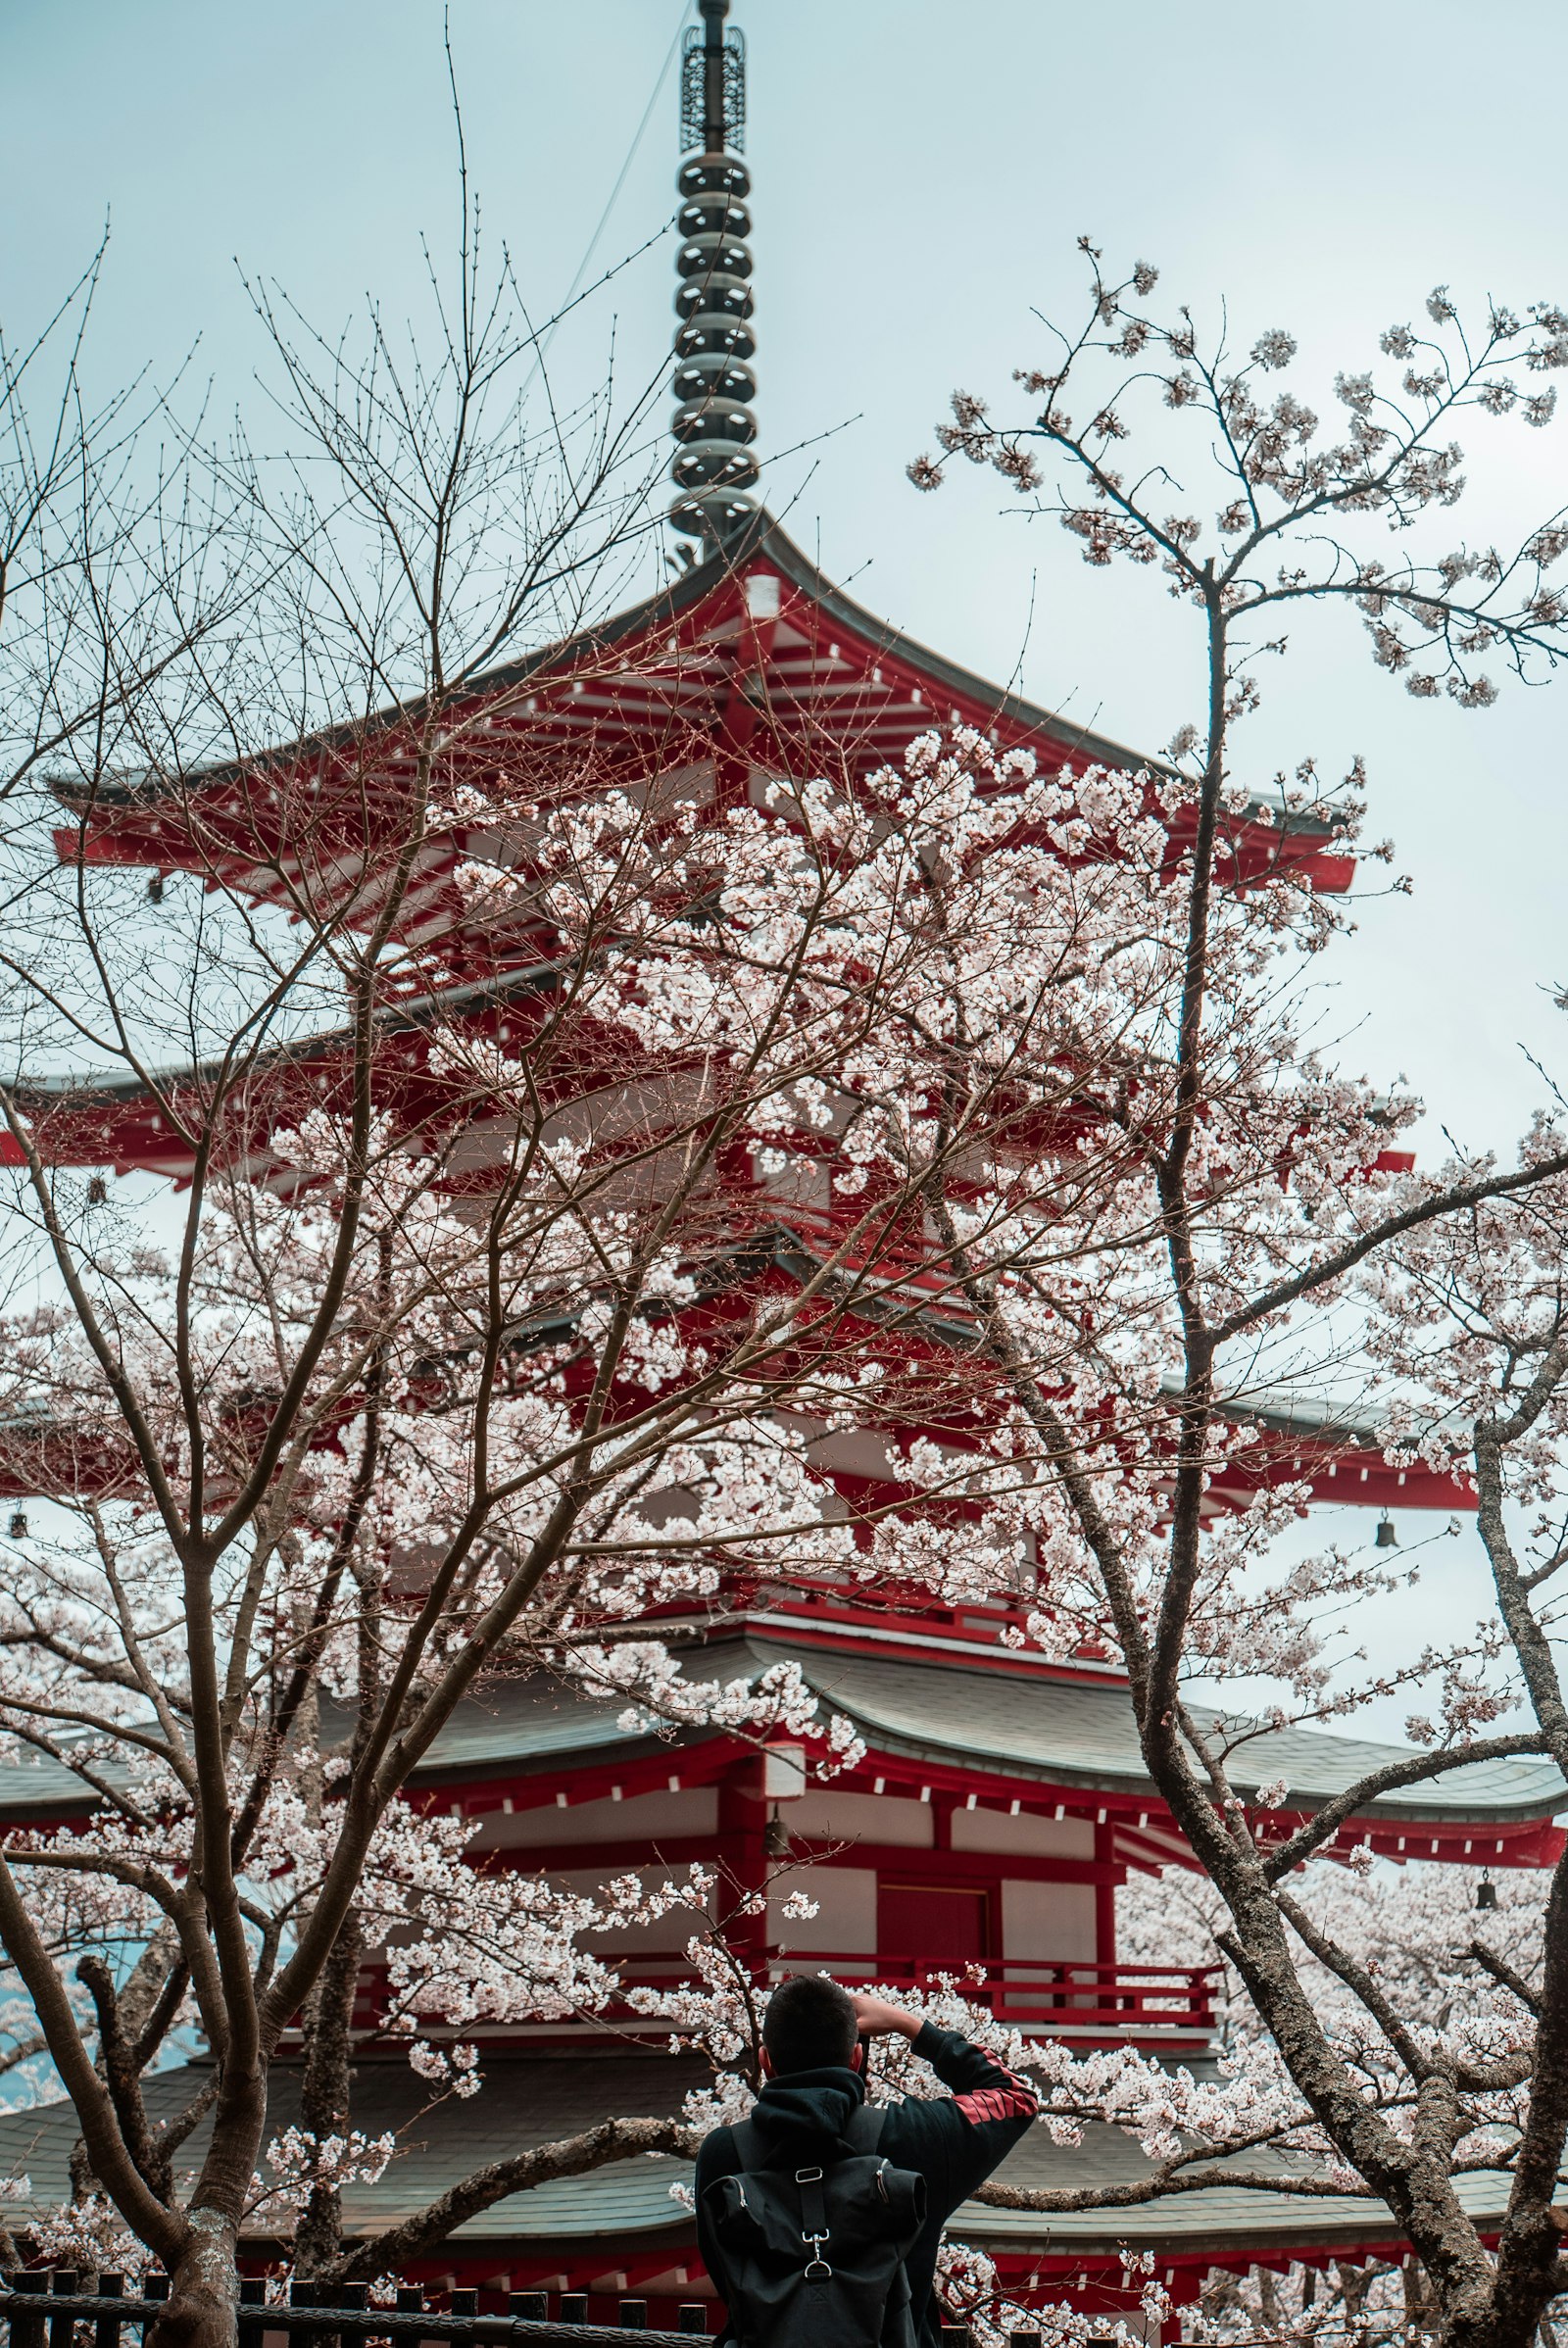 Sony a7S + Tamron 18-270mm F3.5-6.3 Di II PZD sample photo. Red and white japanese photography